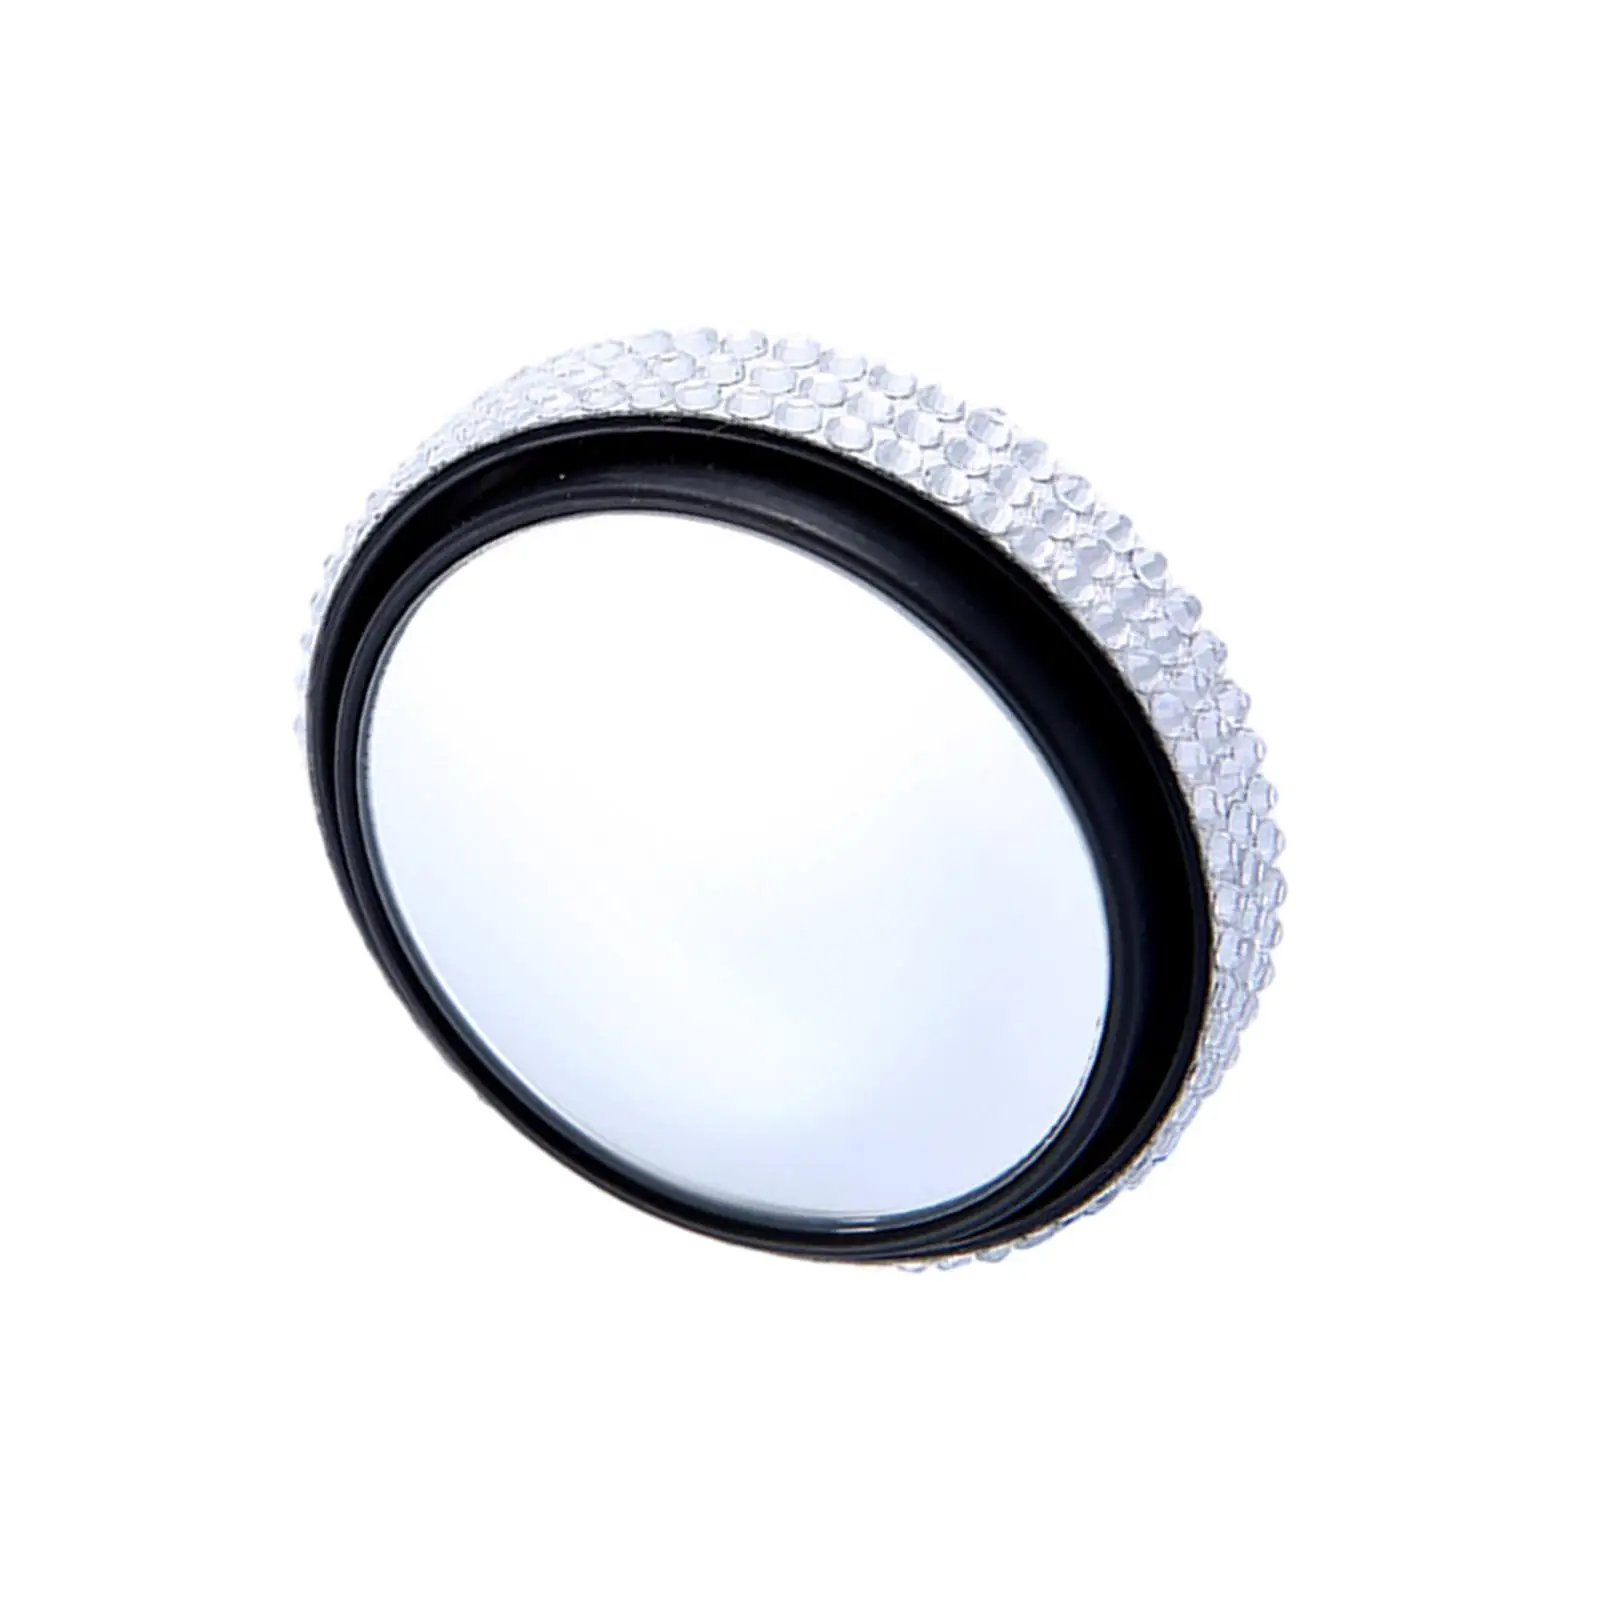 Automotive Blind Spot Mirror Accessory Wide Angle for RV Vehicles Truck